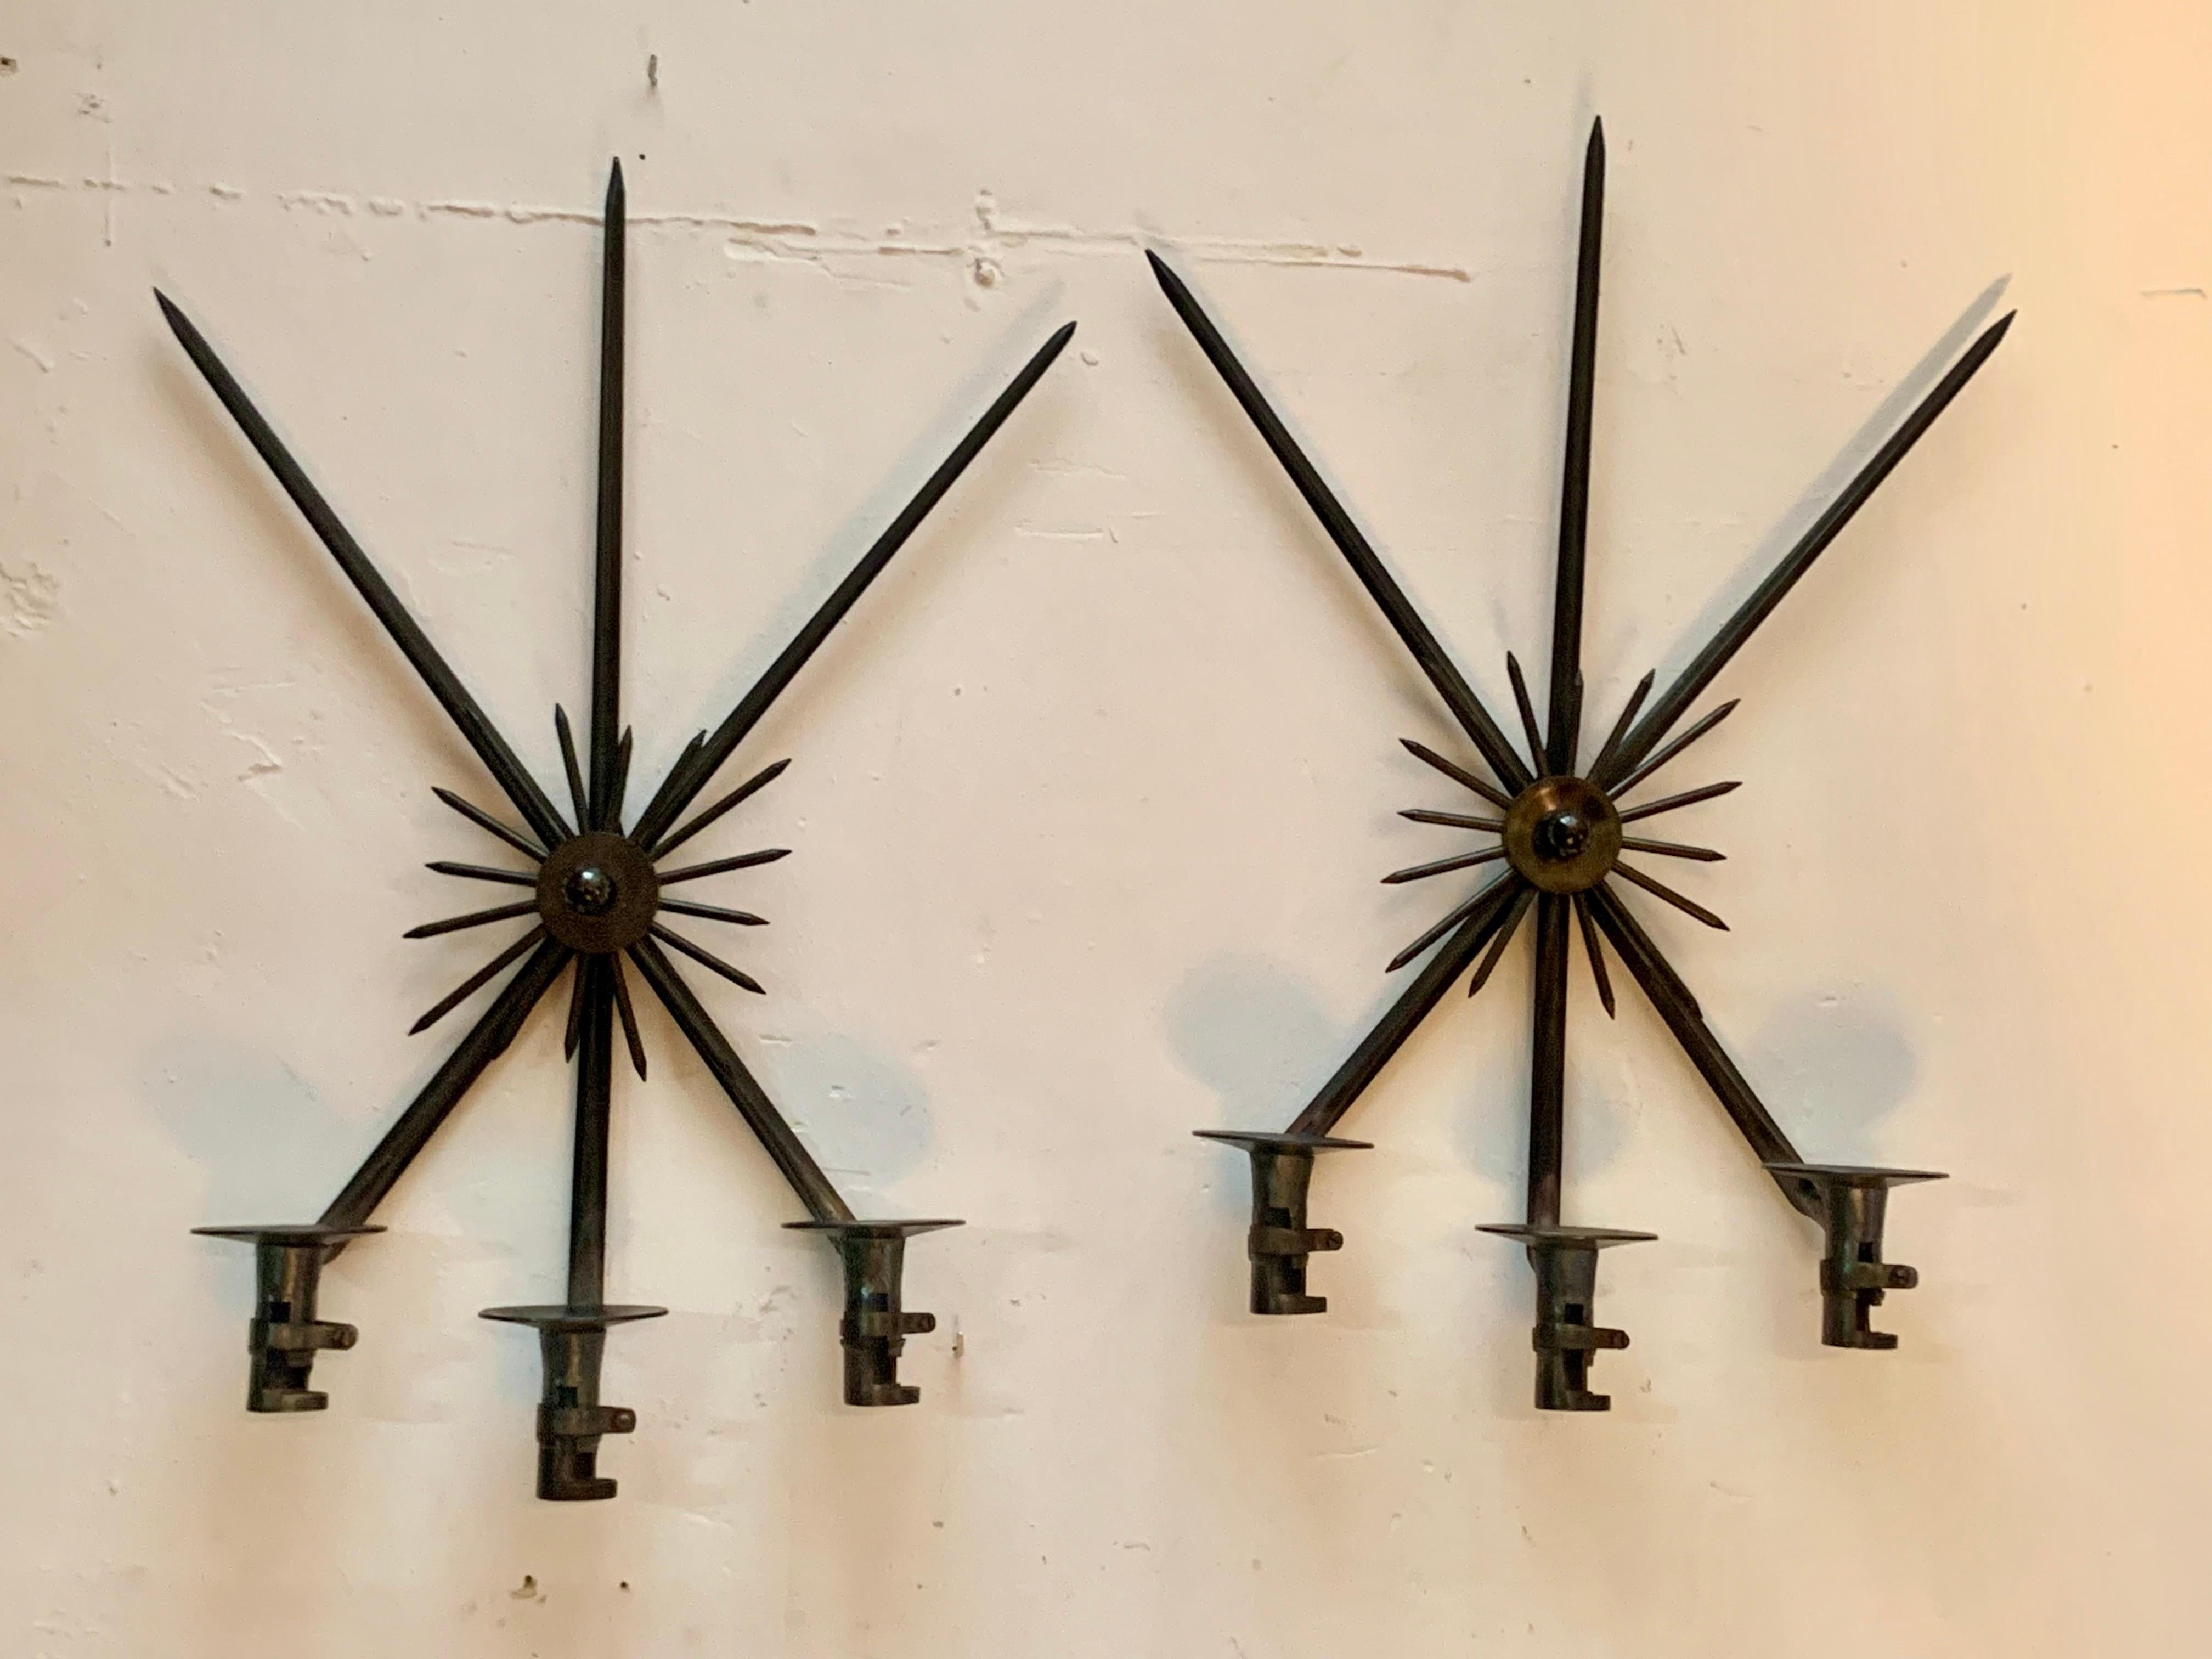 A pair of original wall sconces, with a natural candle, made with old bayonet weapons, in the shape of a cross with three bases for the candles and a central ornament in the shape of sun rays.